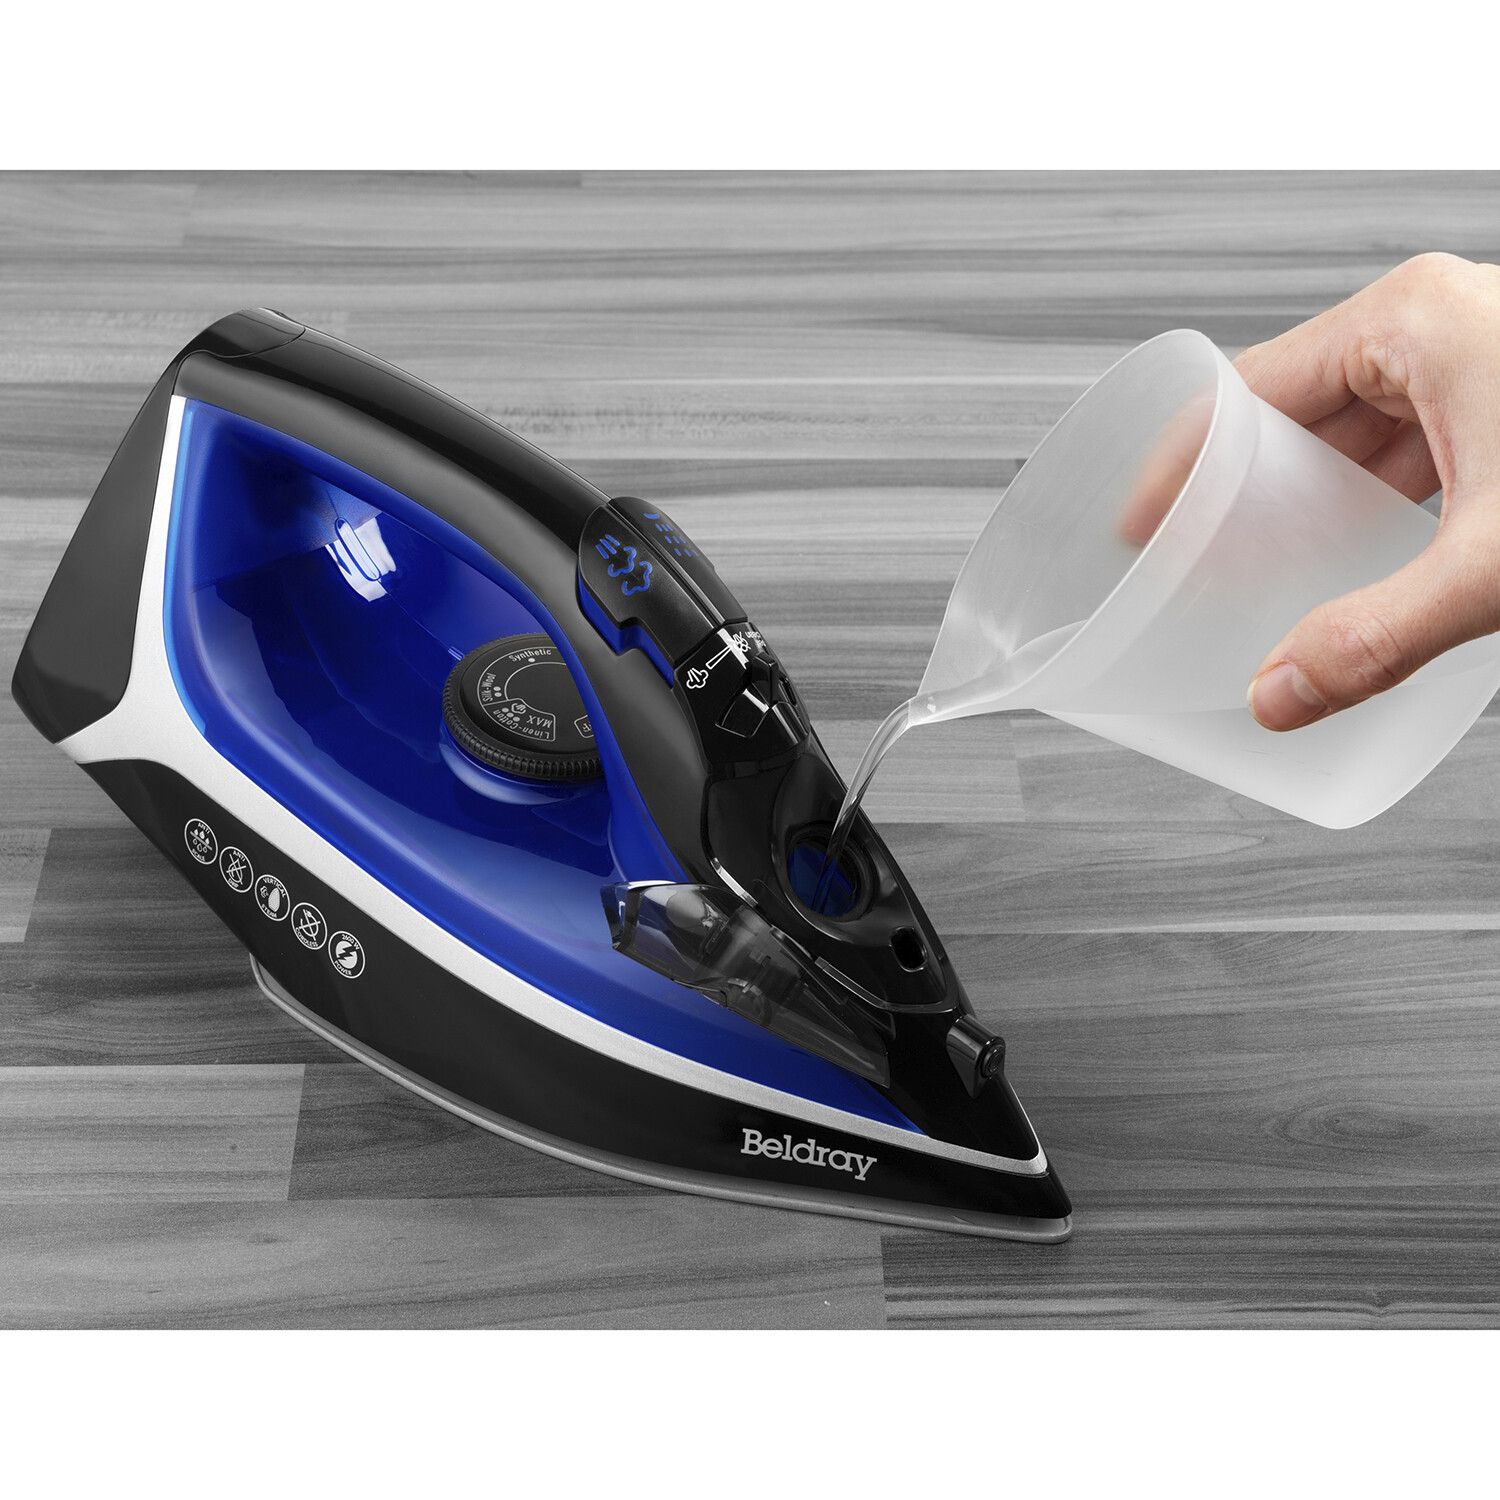 Beldray 2 in 1 Cordless 360 Iron 2600W Image 4